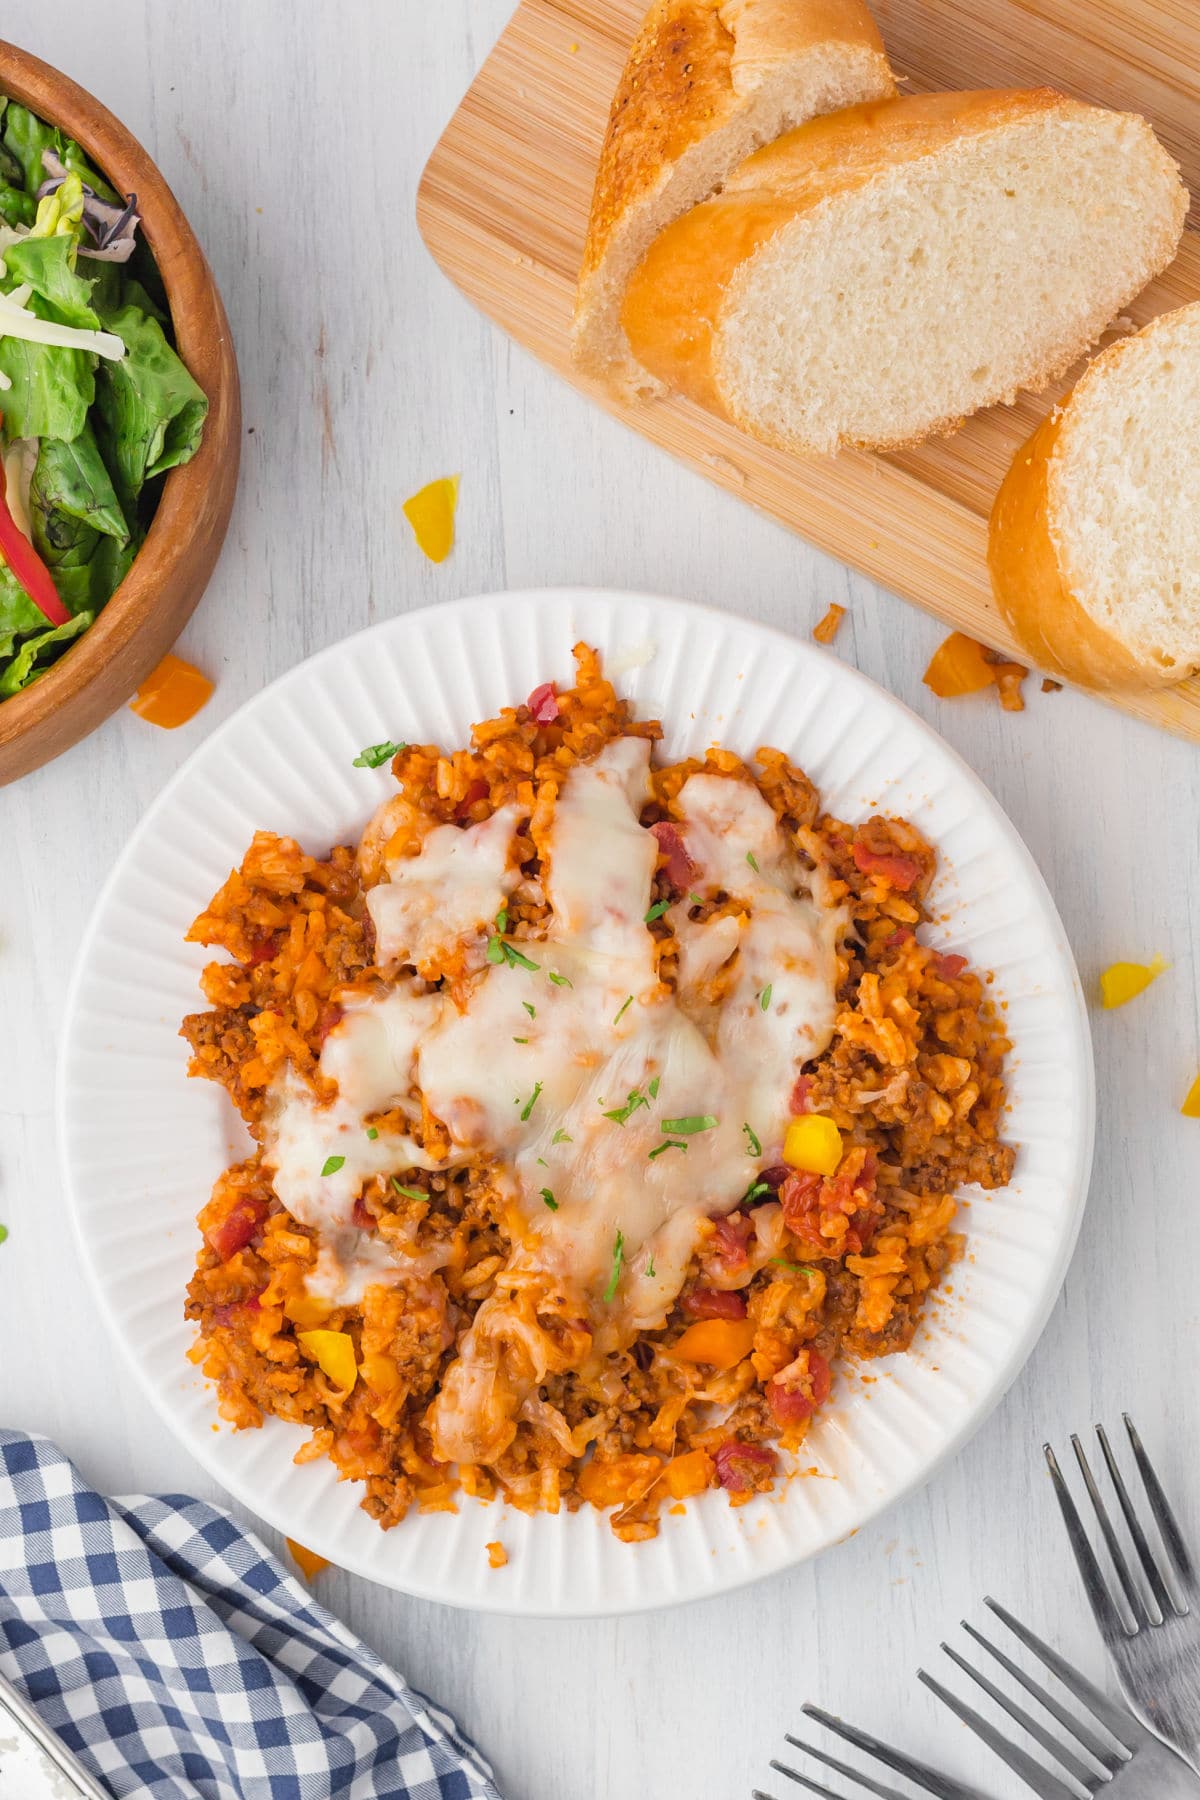 Delicious ground beef and rice casserole served up on a white plate with slices of bread and a salad.